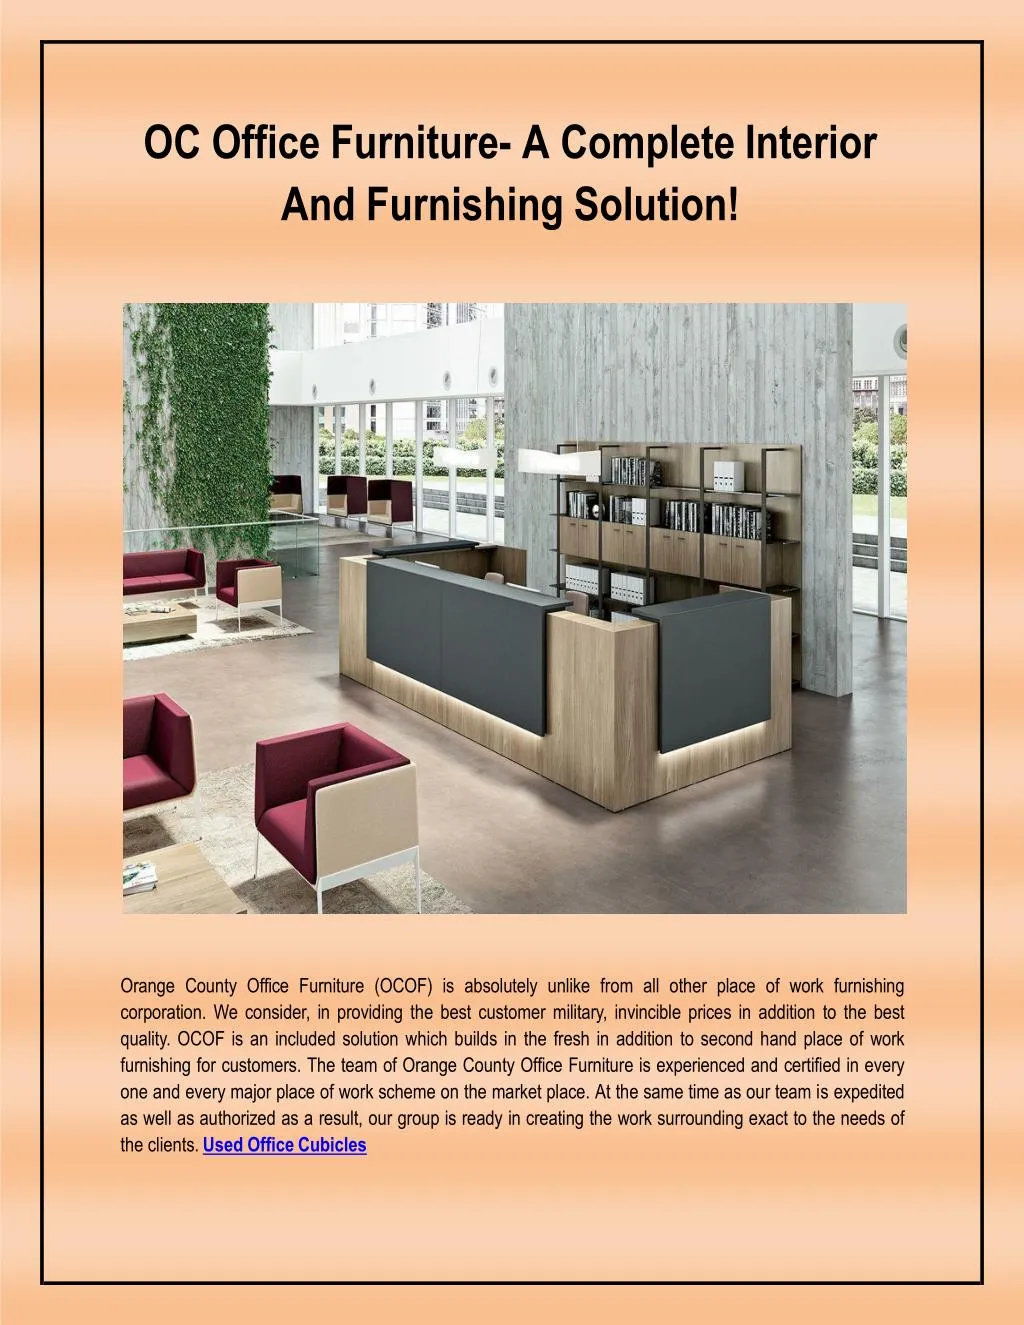 oc office furniture a complete interior and furnishing solution